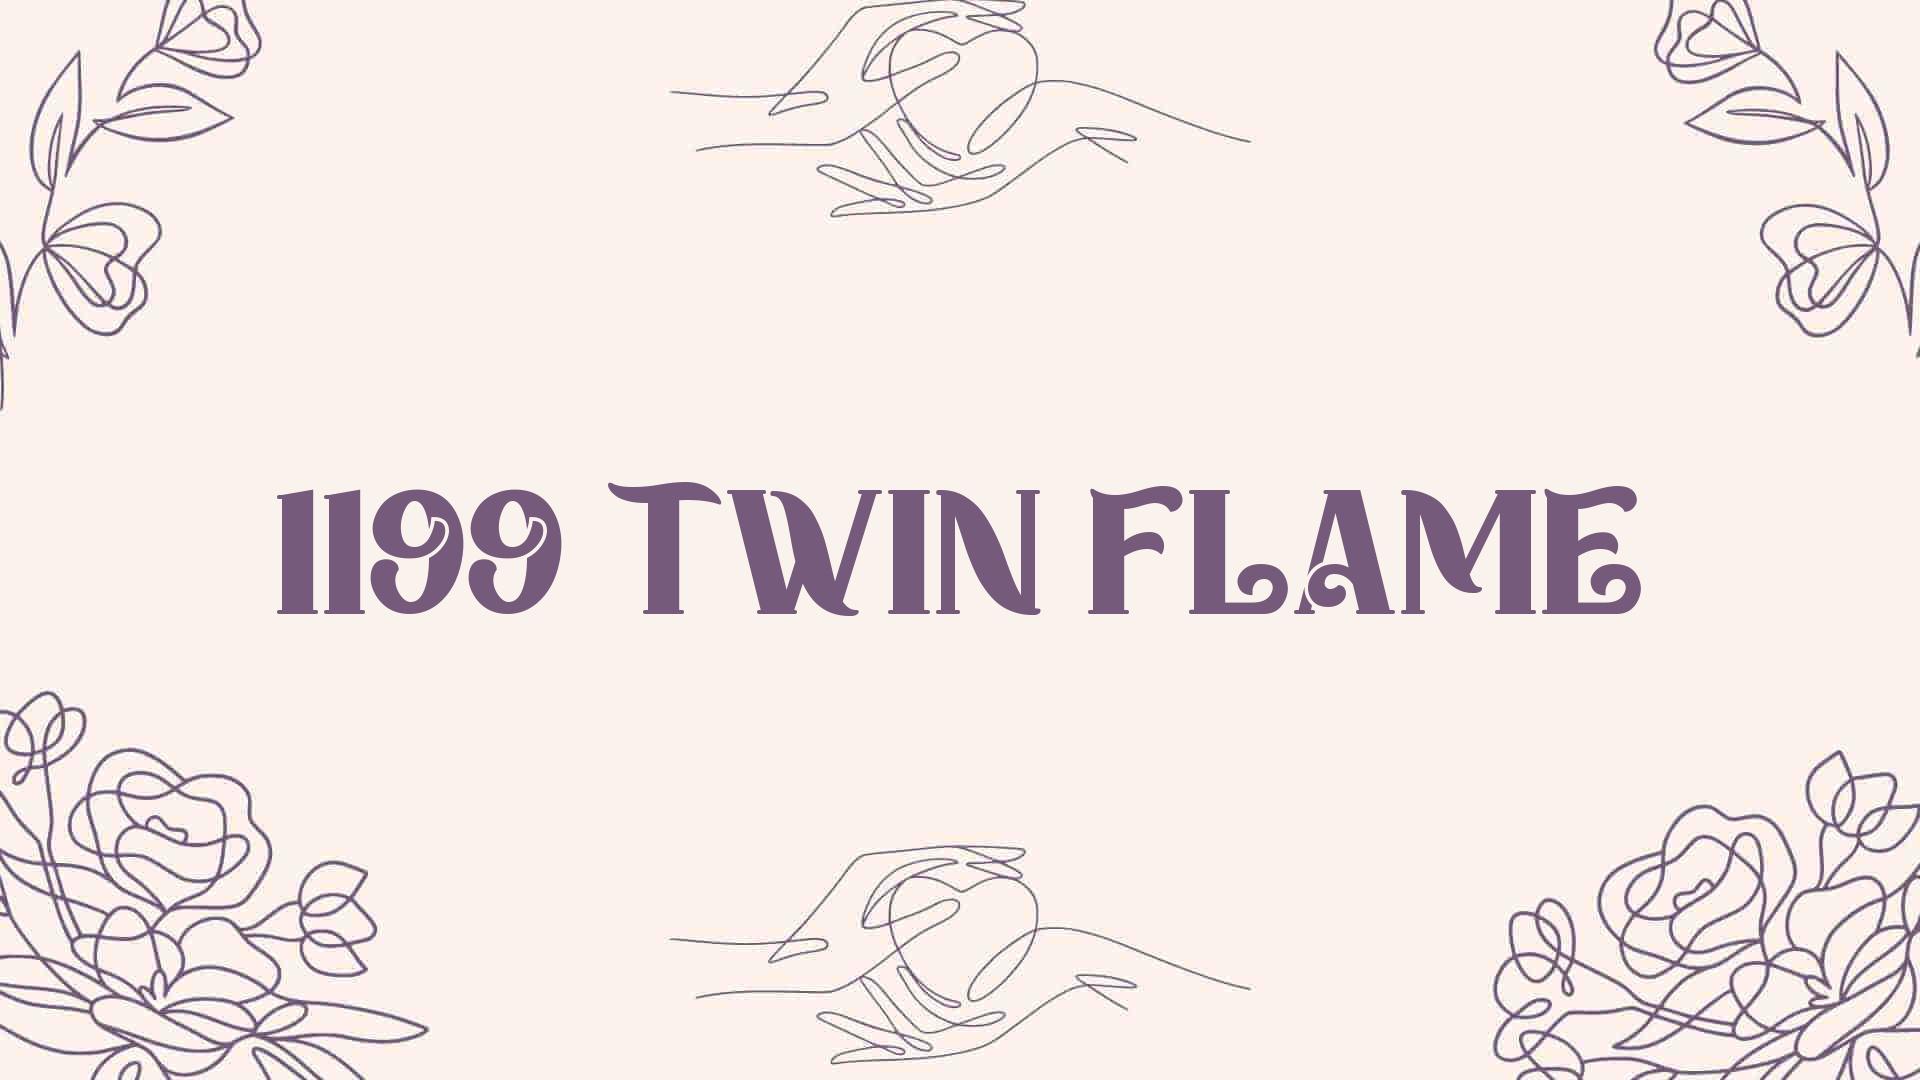 1199 twin flame [ Meaning Revealed ]